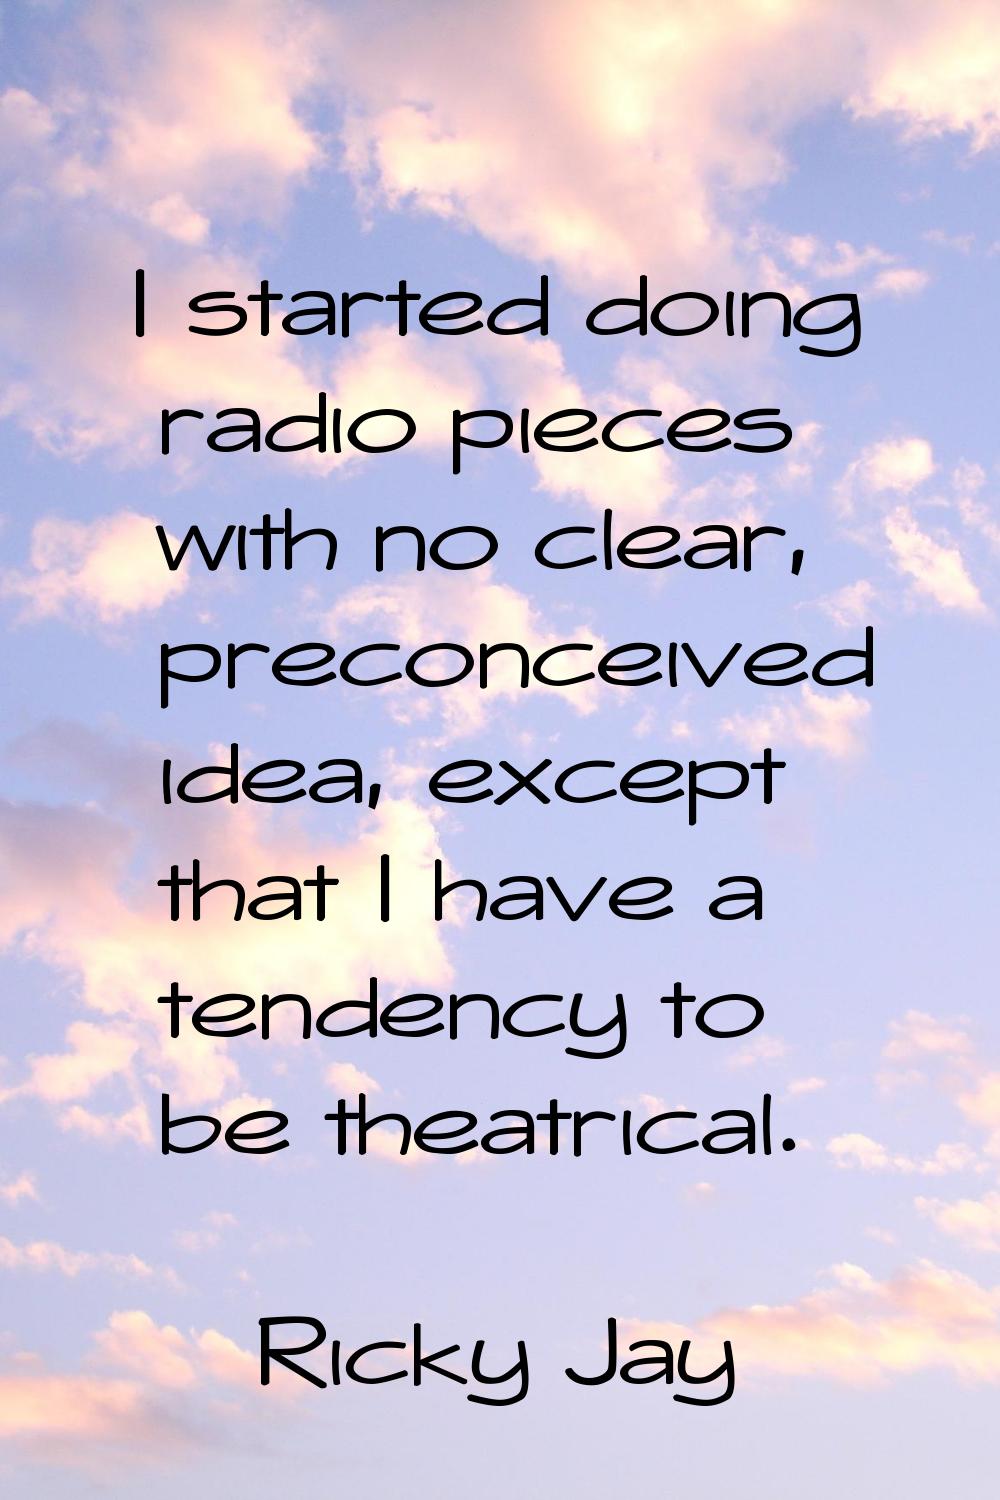 I started doing radio pieces with no clear, preconceived idea, except that I have a tendency to be 